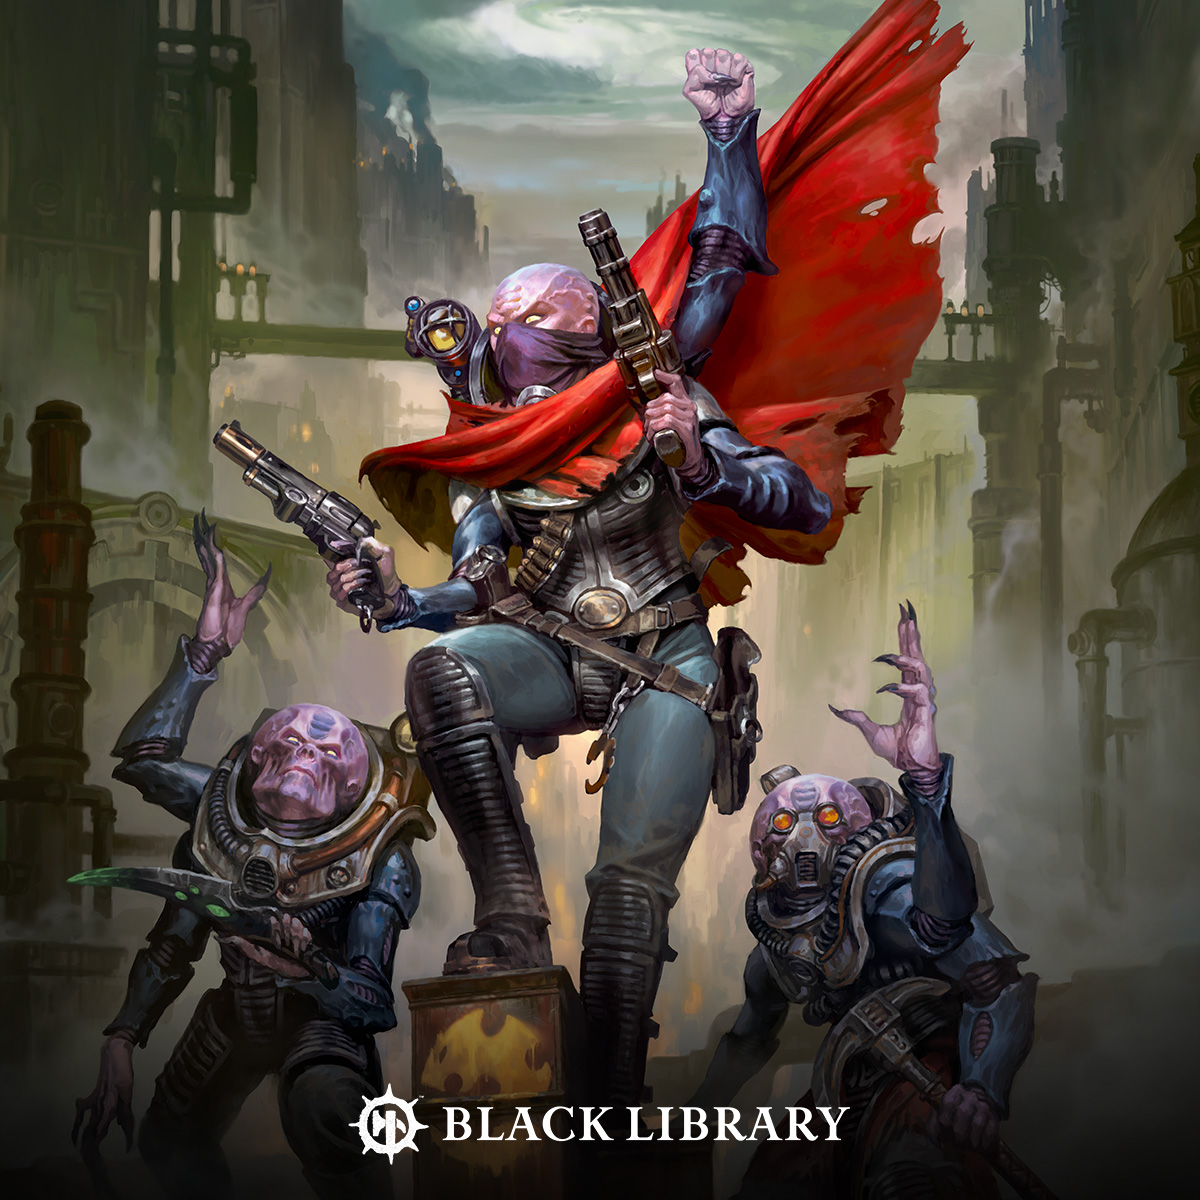 Before you start playing Kill Team: Termination, get inside the heads of the Genestealer Cults and decide how you want to revolt. bit.ly/3VneSeY

#WarhammerCommunity #BlackLibrary